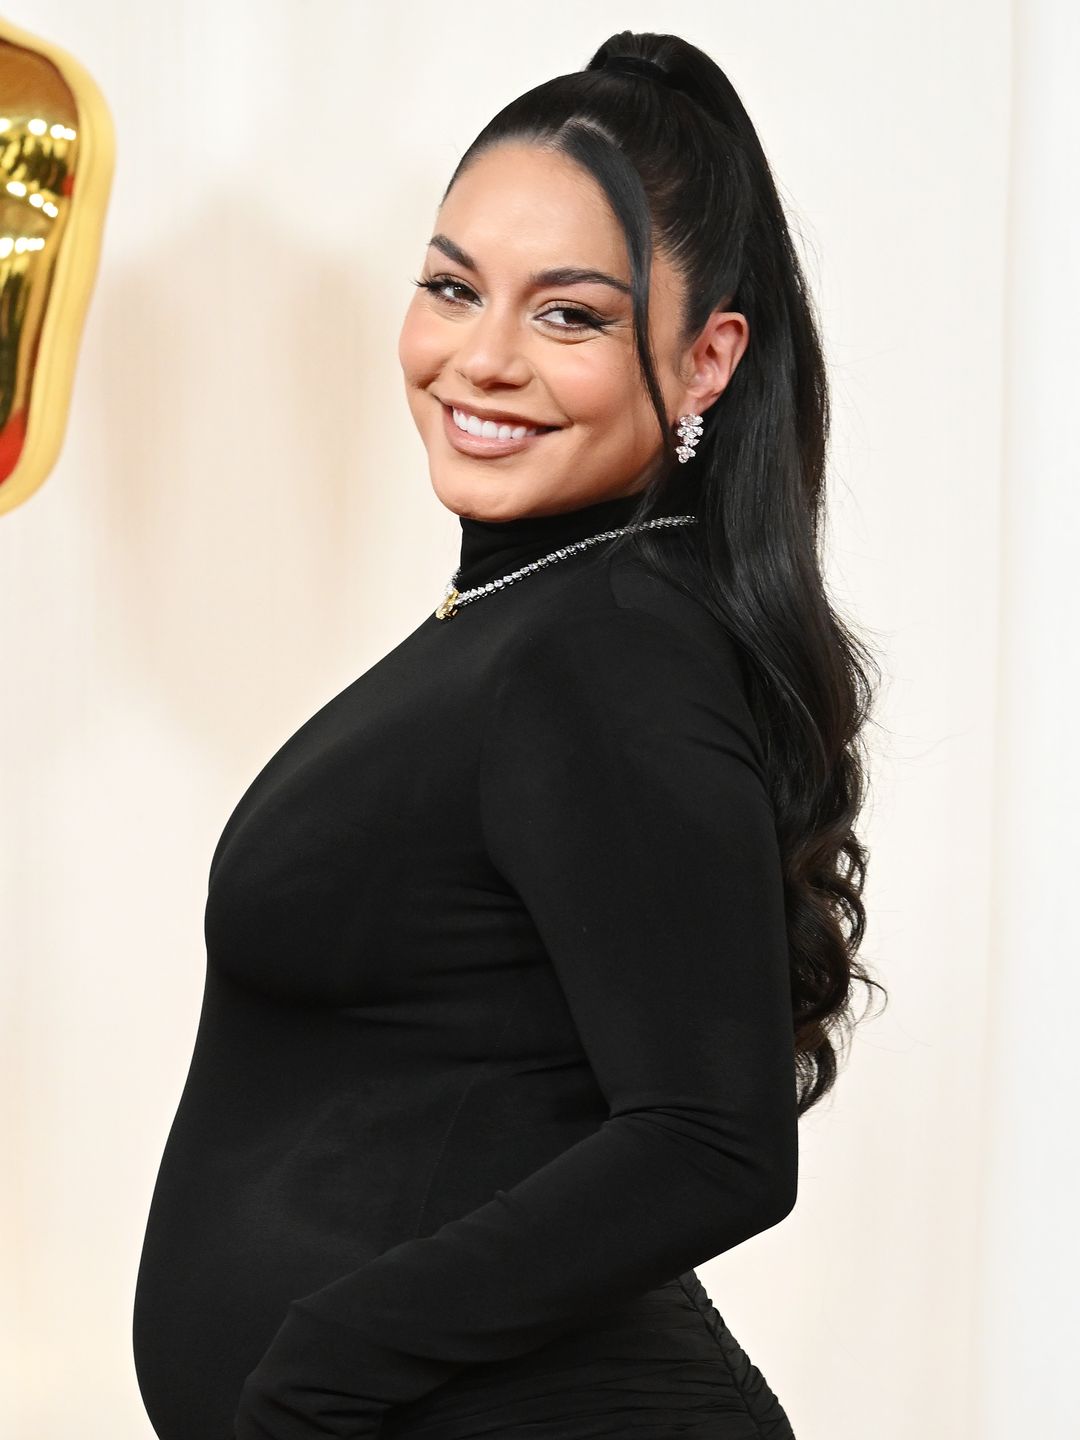 Vanessa Hudgens smiling wearing a black high-necked dress at the Oscars 